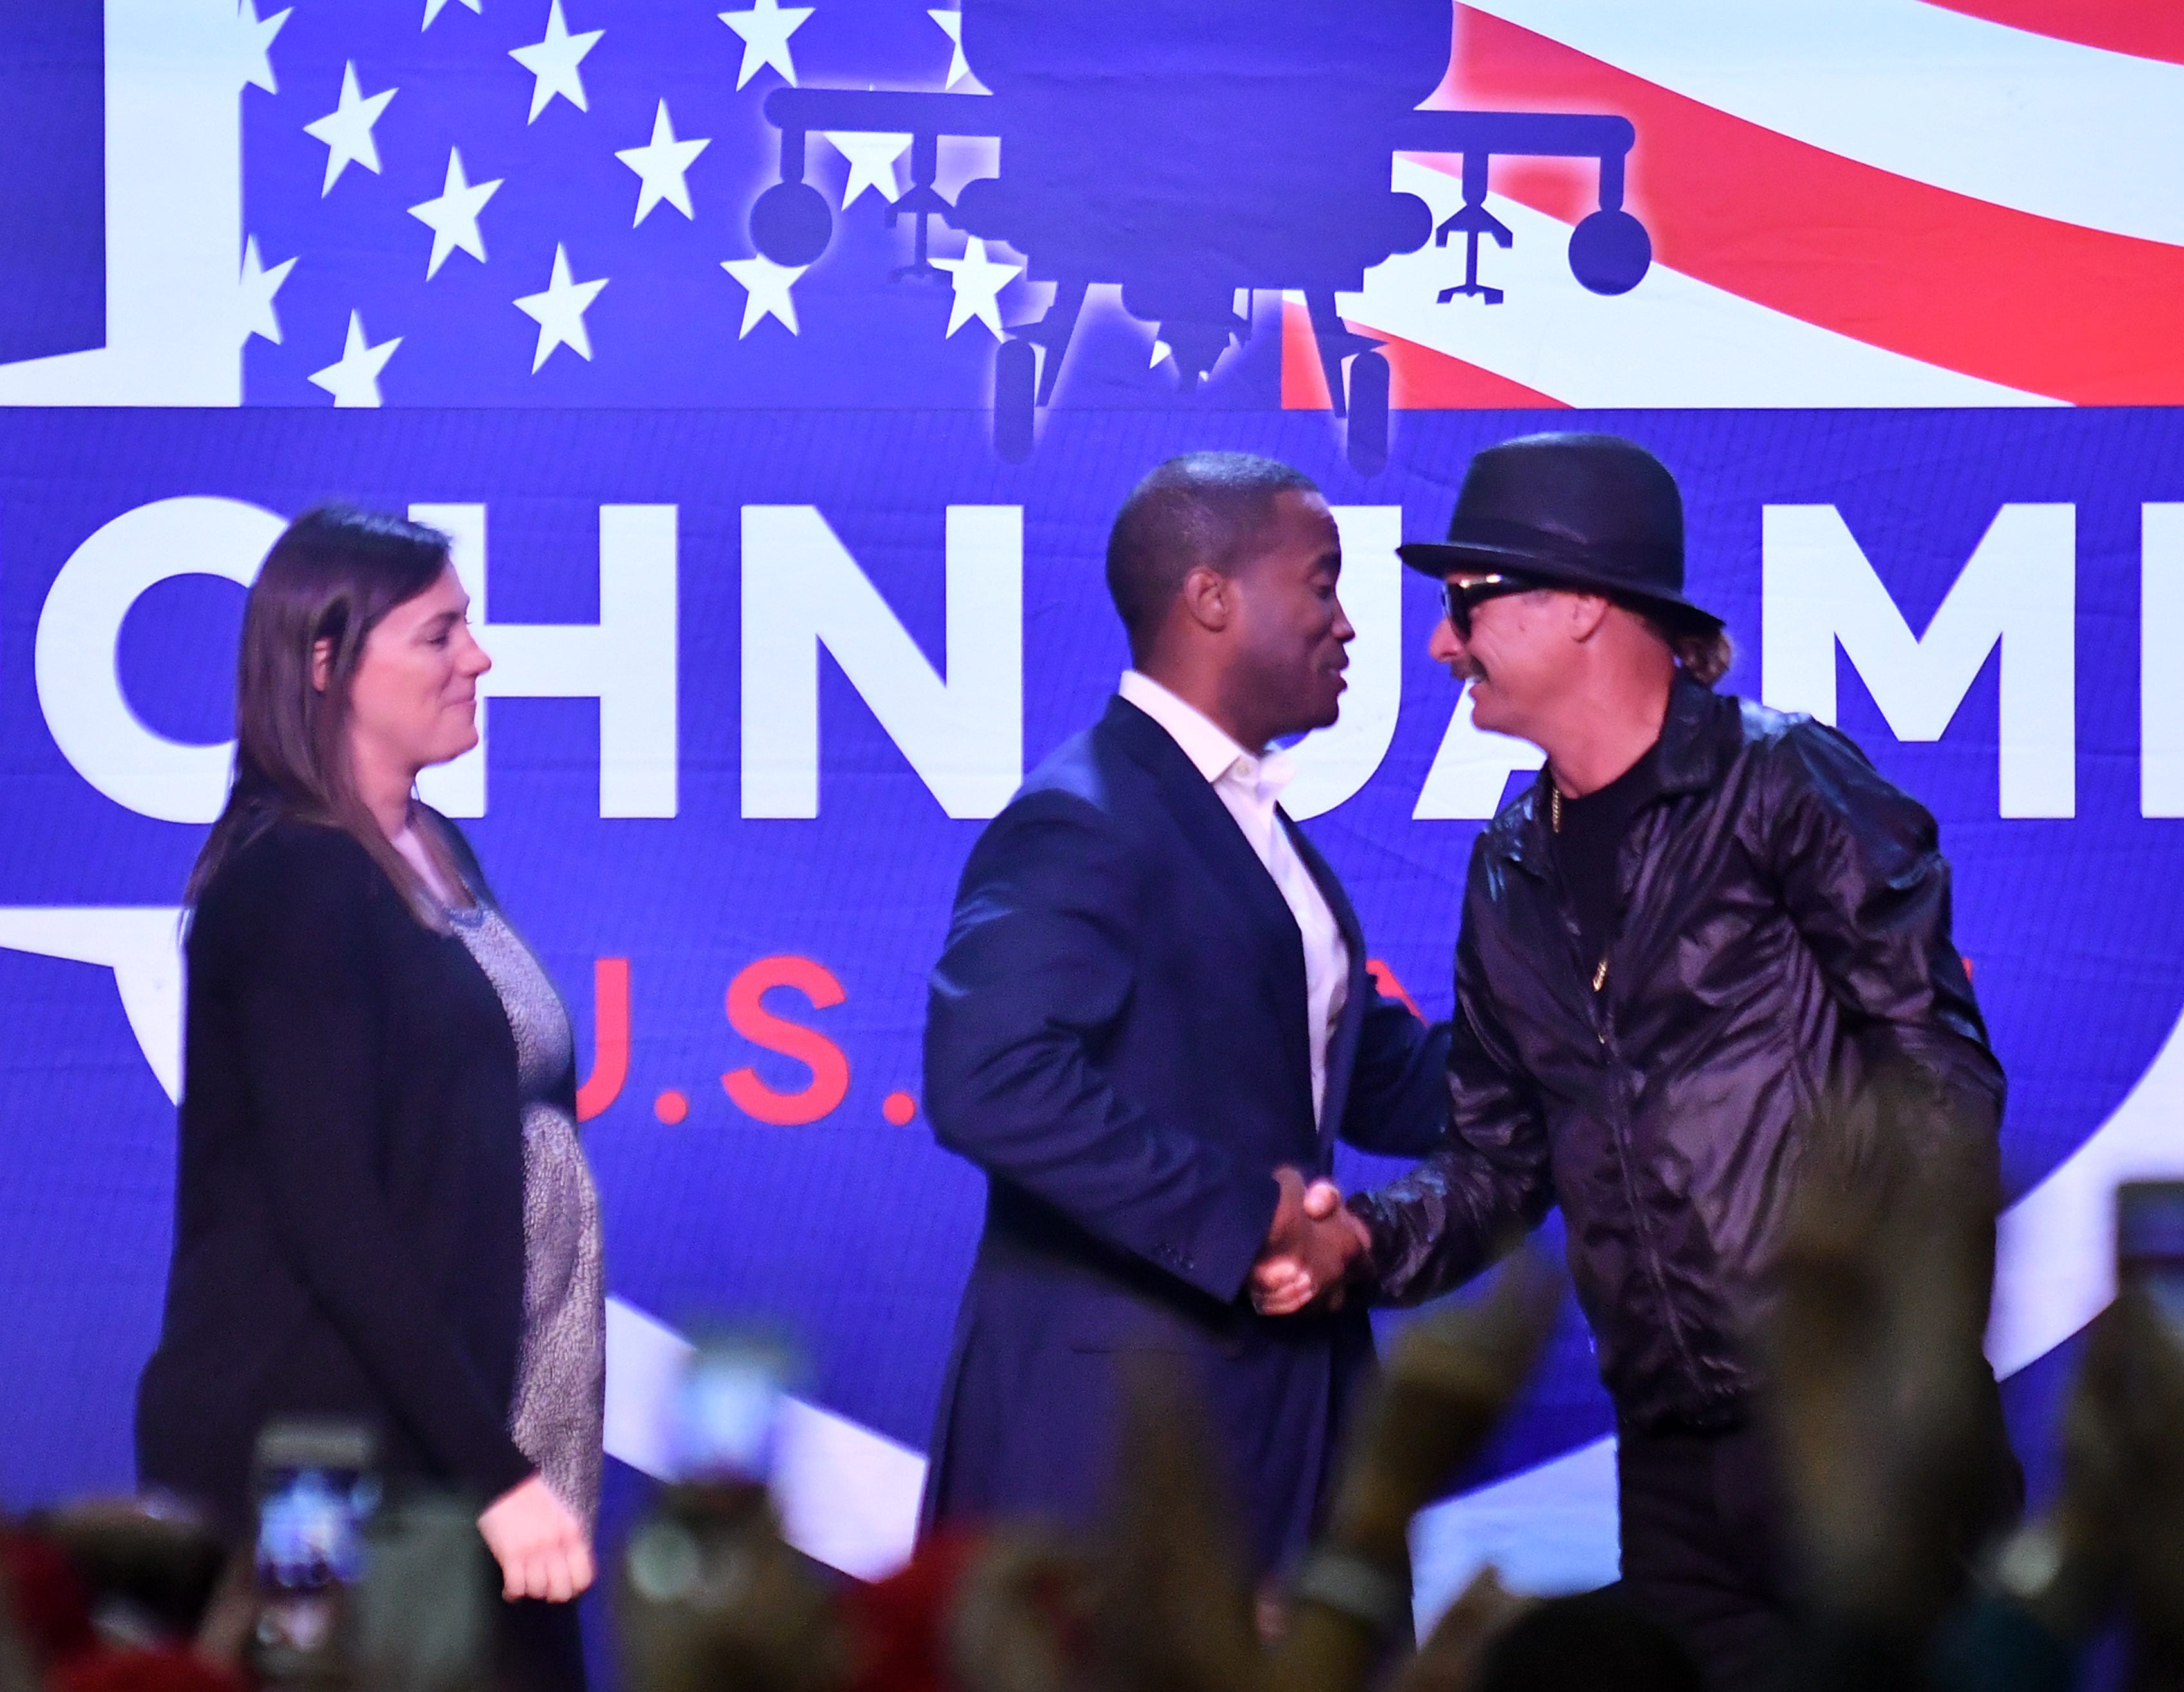 Kid Rock introduces John James and his wife Elizabeth, left, during the rally.    "Protect The American Dream Rally" for Republican candidate for U.S. Senate John James at the Flagstar Strand Theatre in Pontiac, Mich. on Oct 17, 2018.